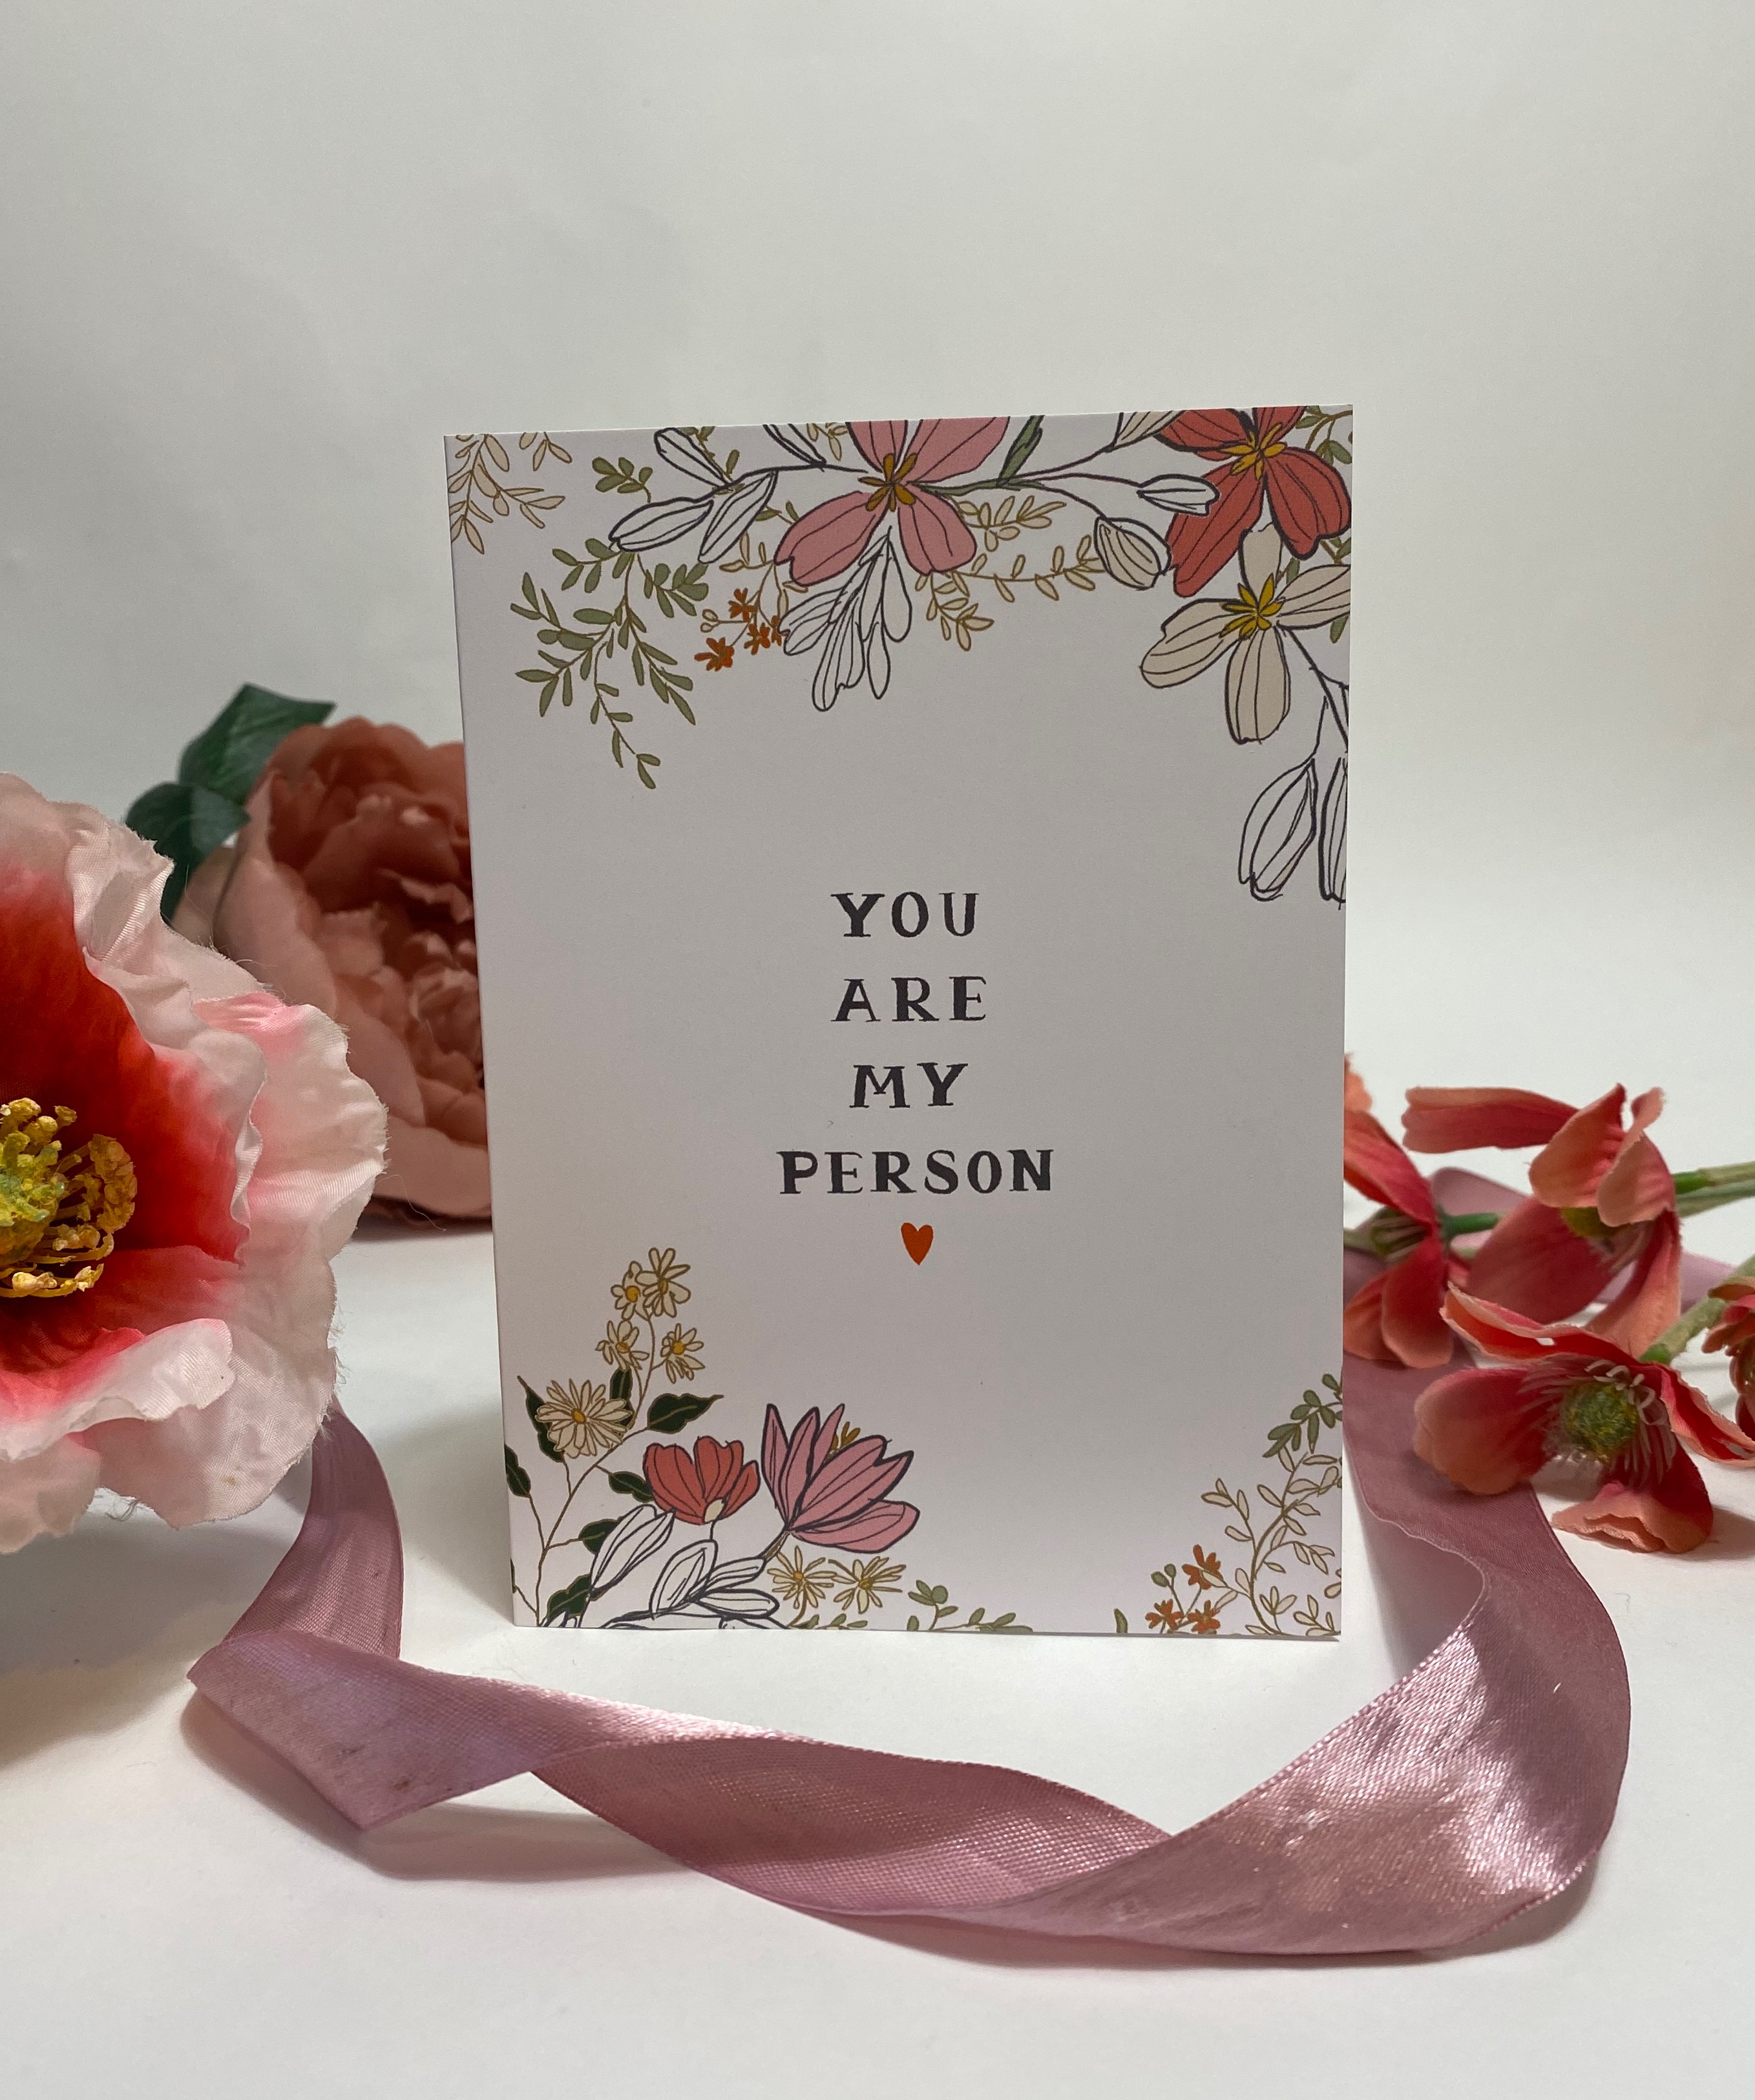 You are my person greetings card